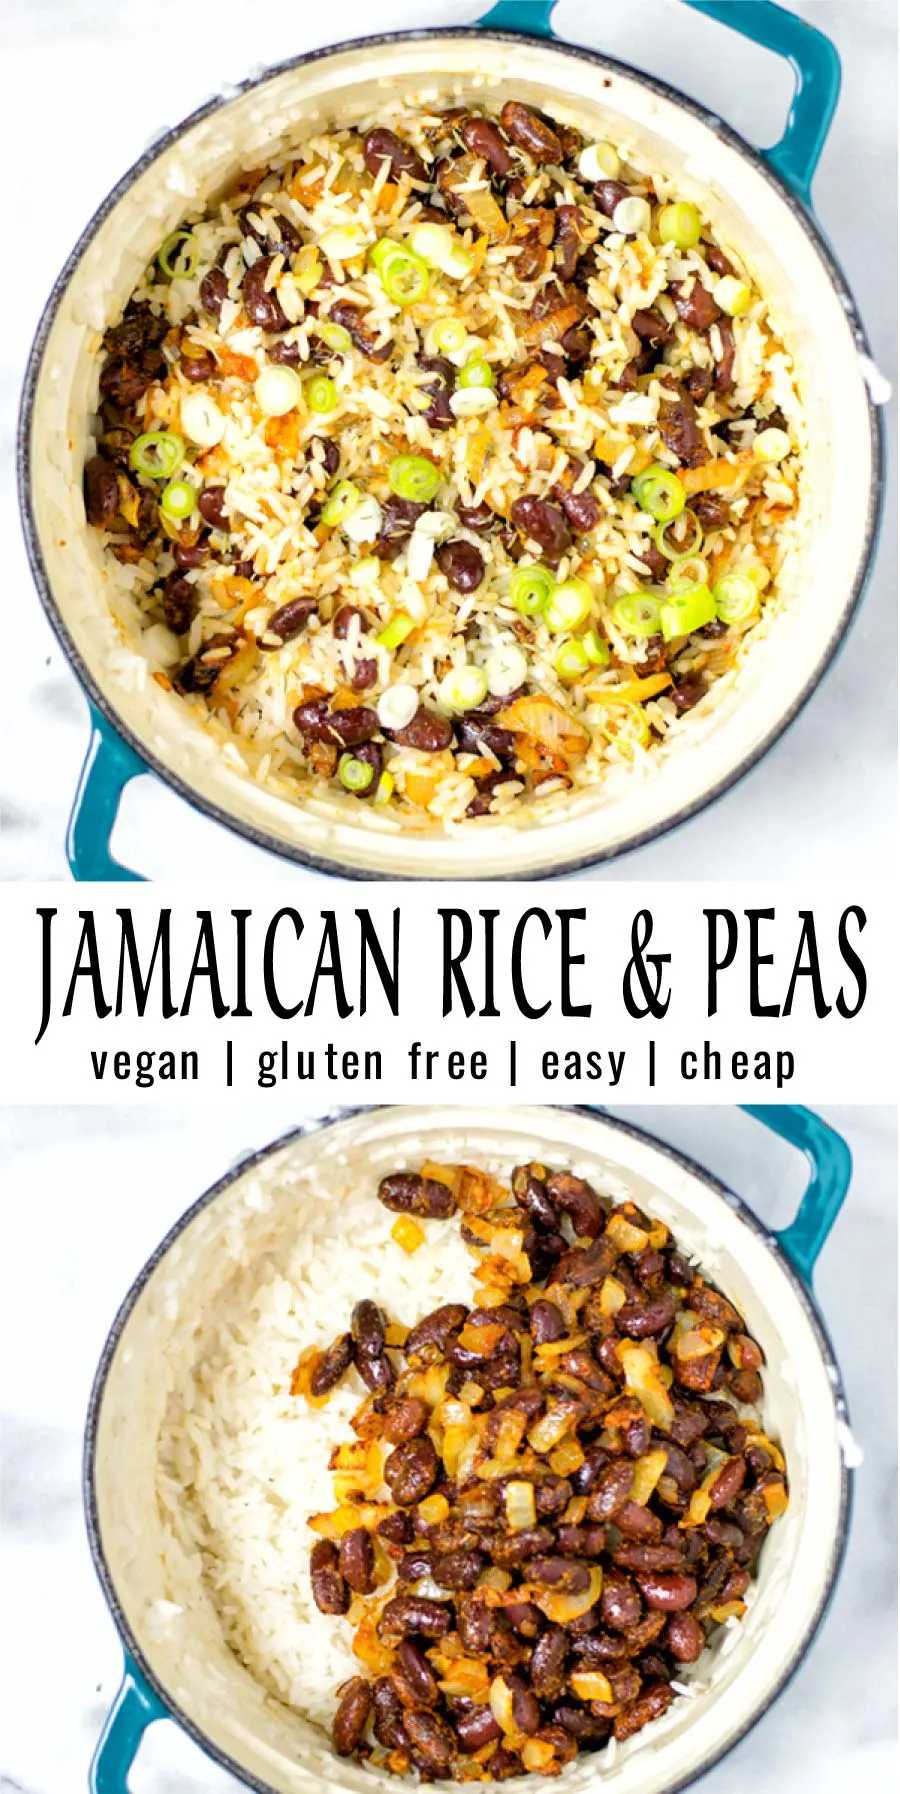 Easy and satisfying: these Jamaican Rice and Peas are easy to make and budget friendly. Naturally vegan, a keeper that everyone will count on not only for lunch, dinner also great for meal prep. #vegan #dairyfree #glutenfree #vegetarian #contentednesscooking #dinner #lunch #jamaicanriceandpeas #30minutemeals #mealprep